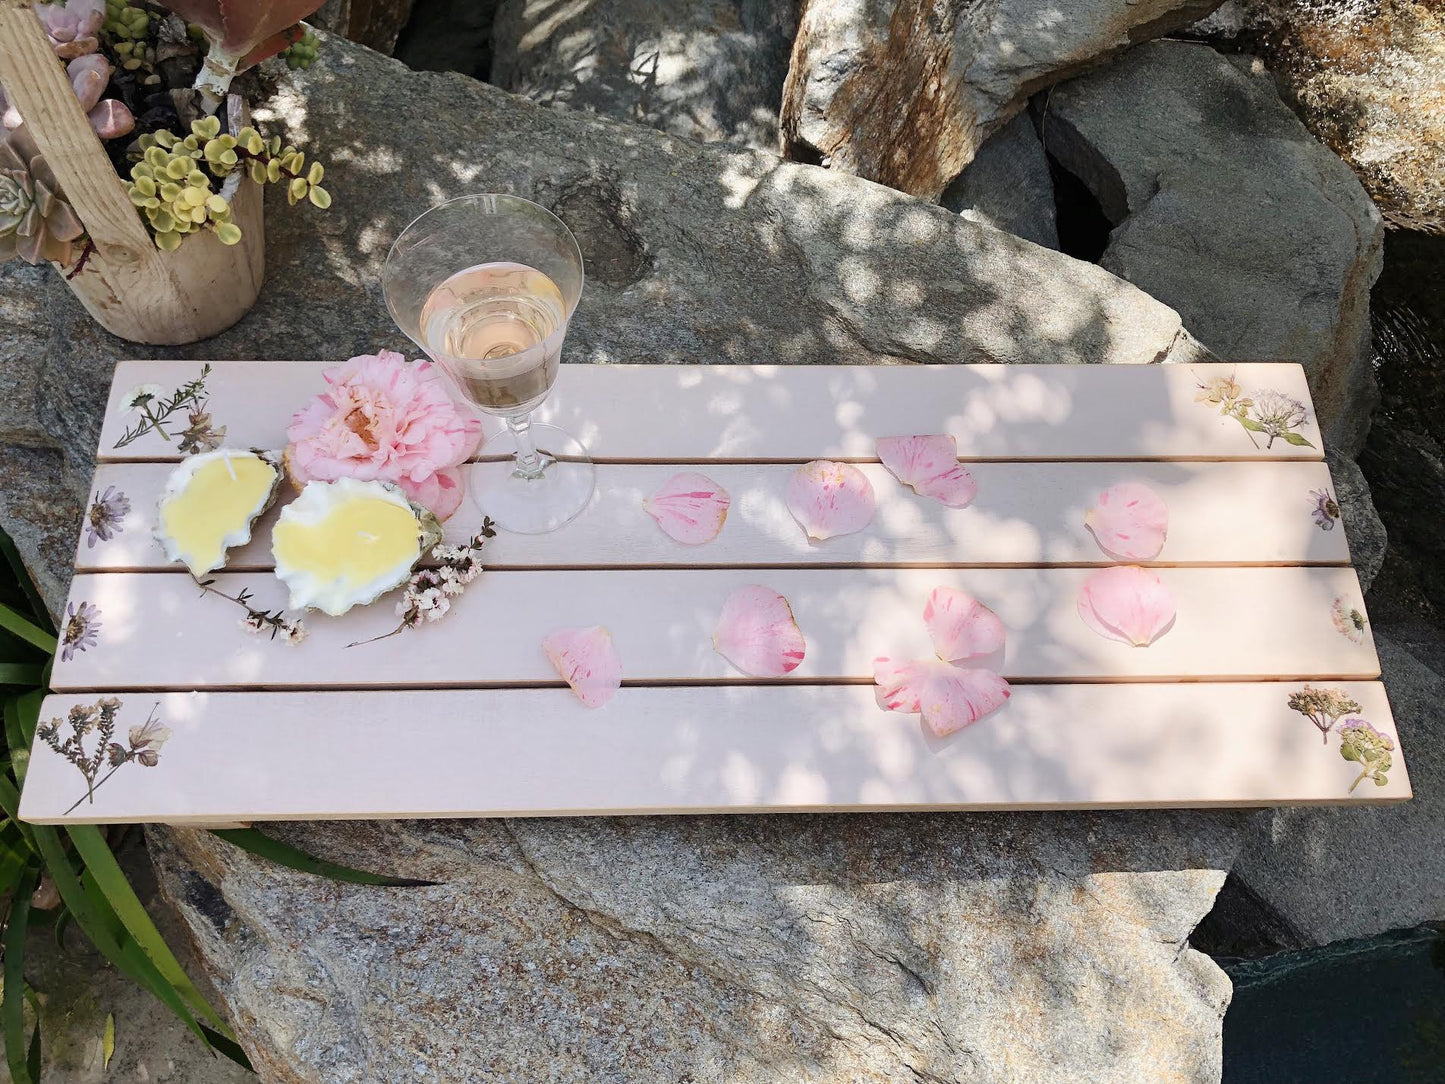 Handmade painted wood bath tray with pressed flowers